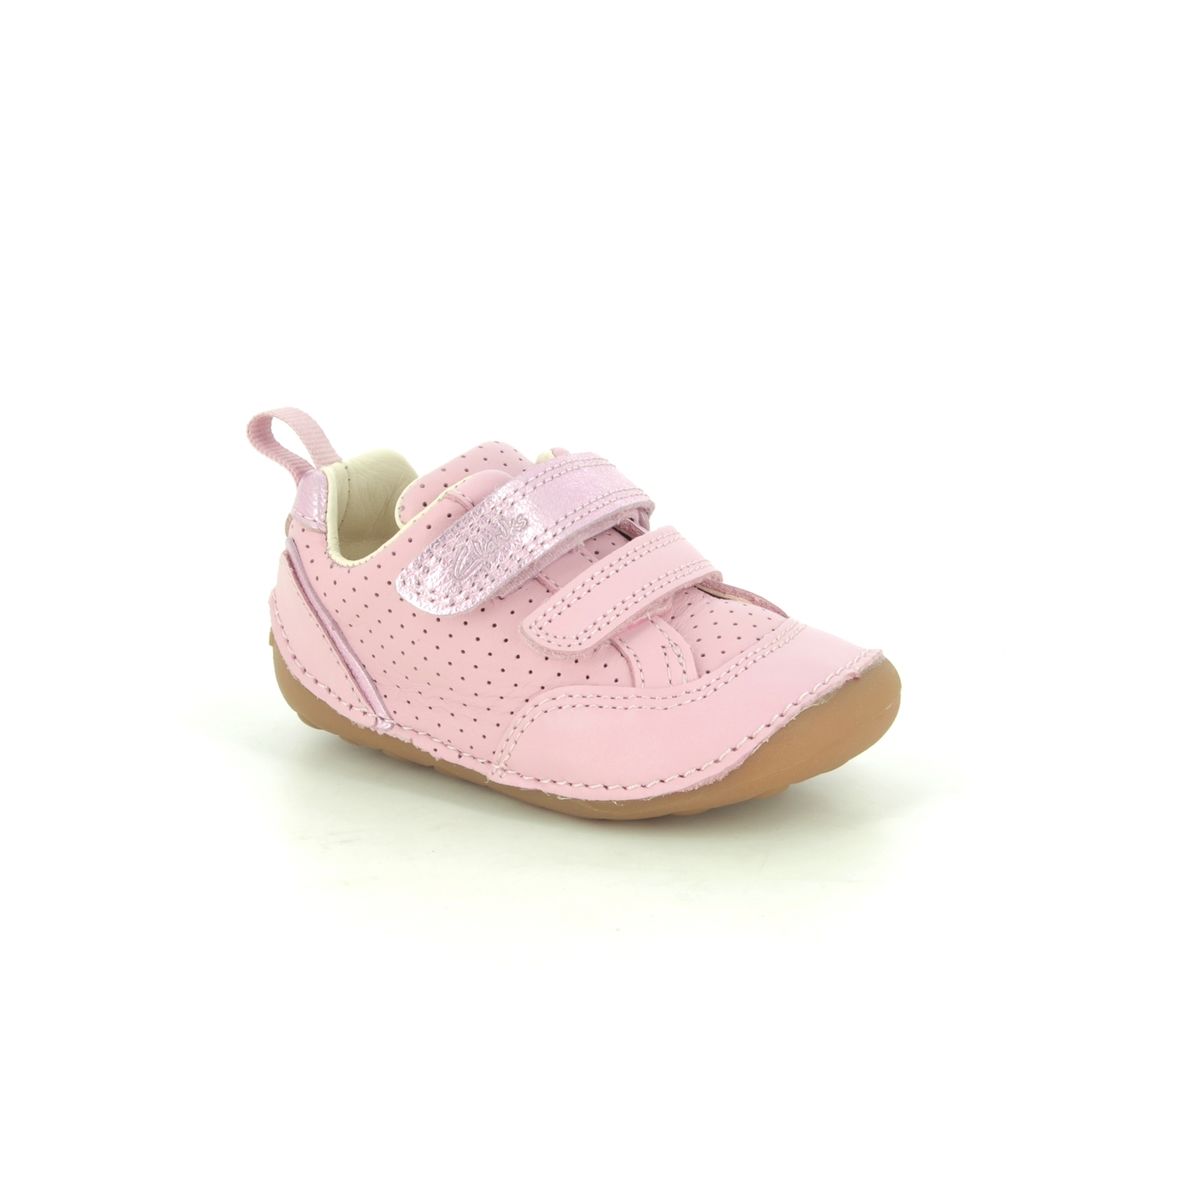 Clarks Tiny Sky T Pink Leather Kids Girls First And Baby Shoes 576286F In Size 3 In Plain Pink Leather F Width Fitting Regular Fit For kids